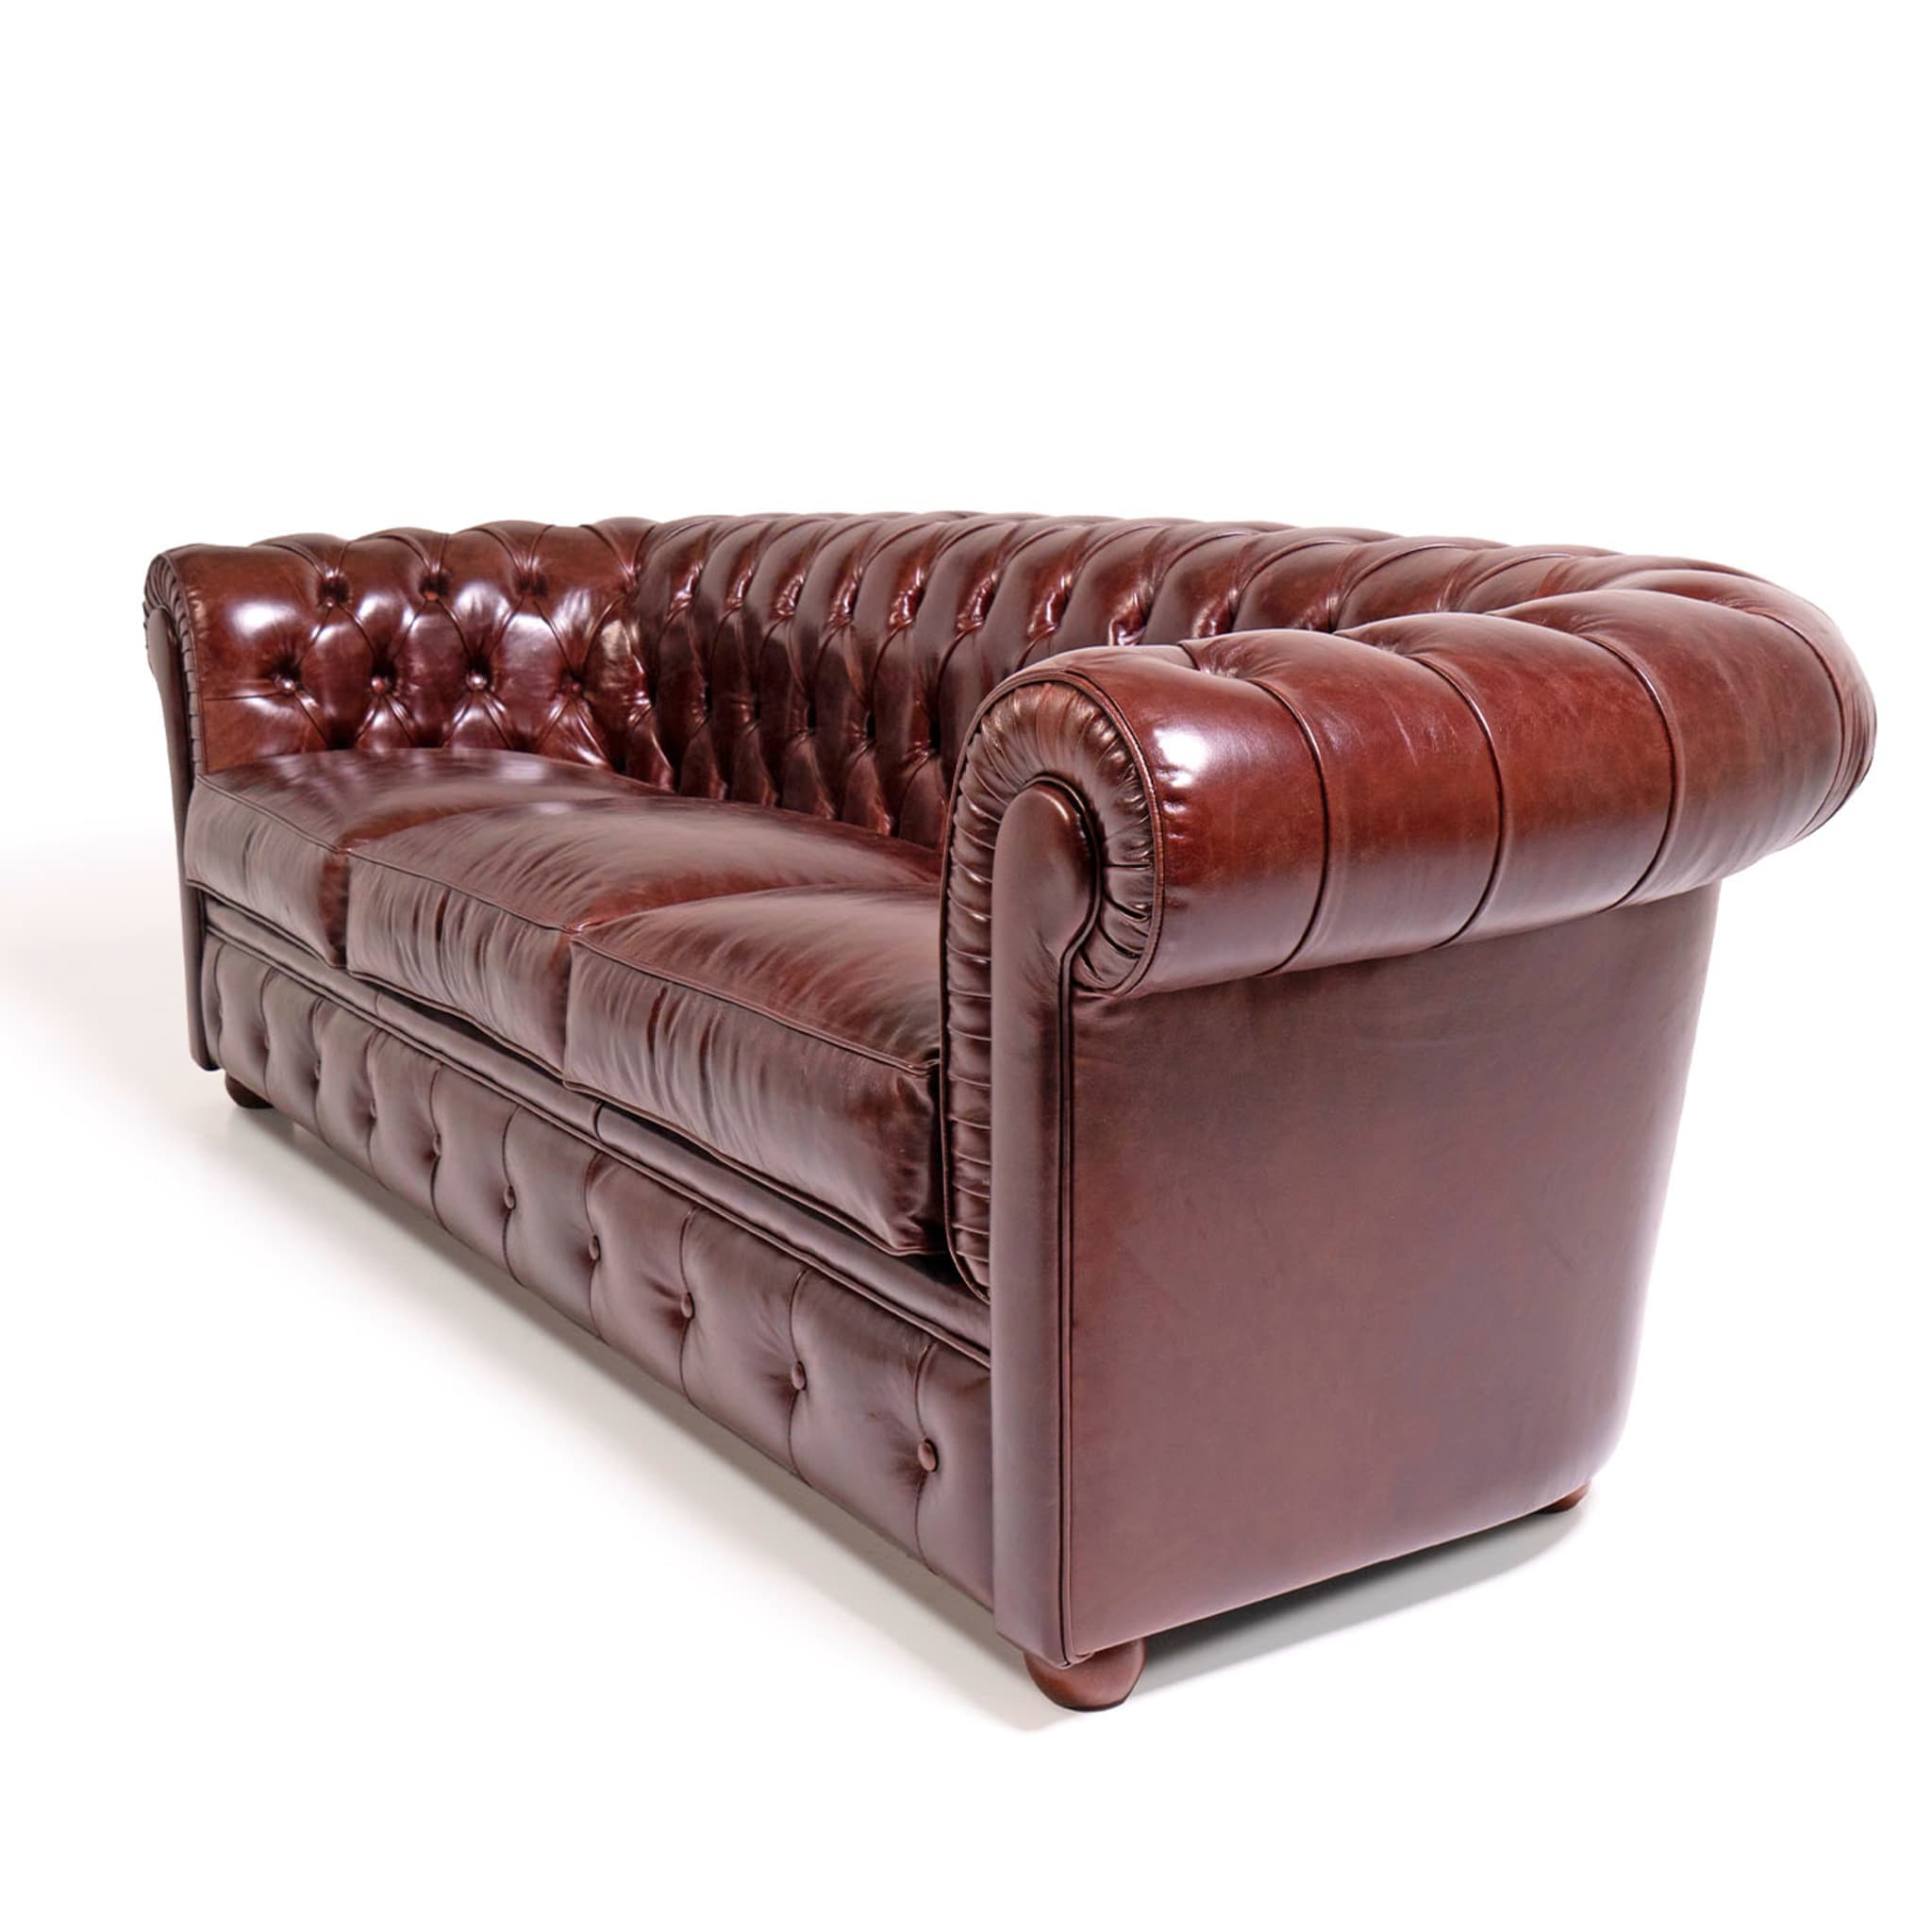 Chesterfield Ruby Leather 3-seater Sofa Tribeca Collection - Alternative view 2